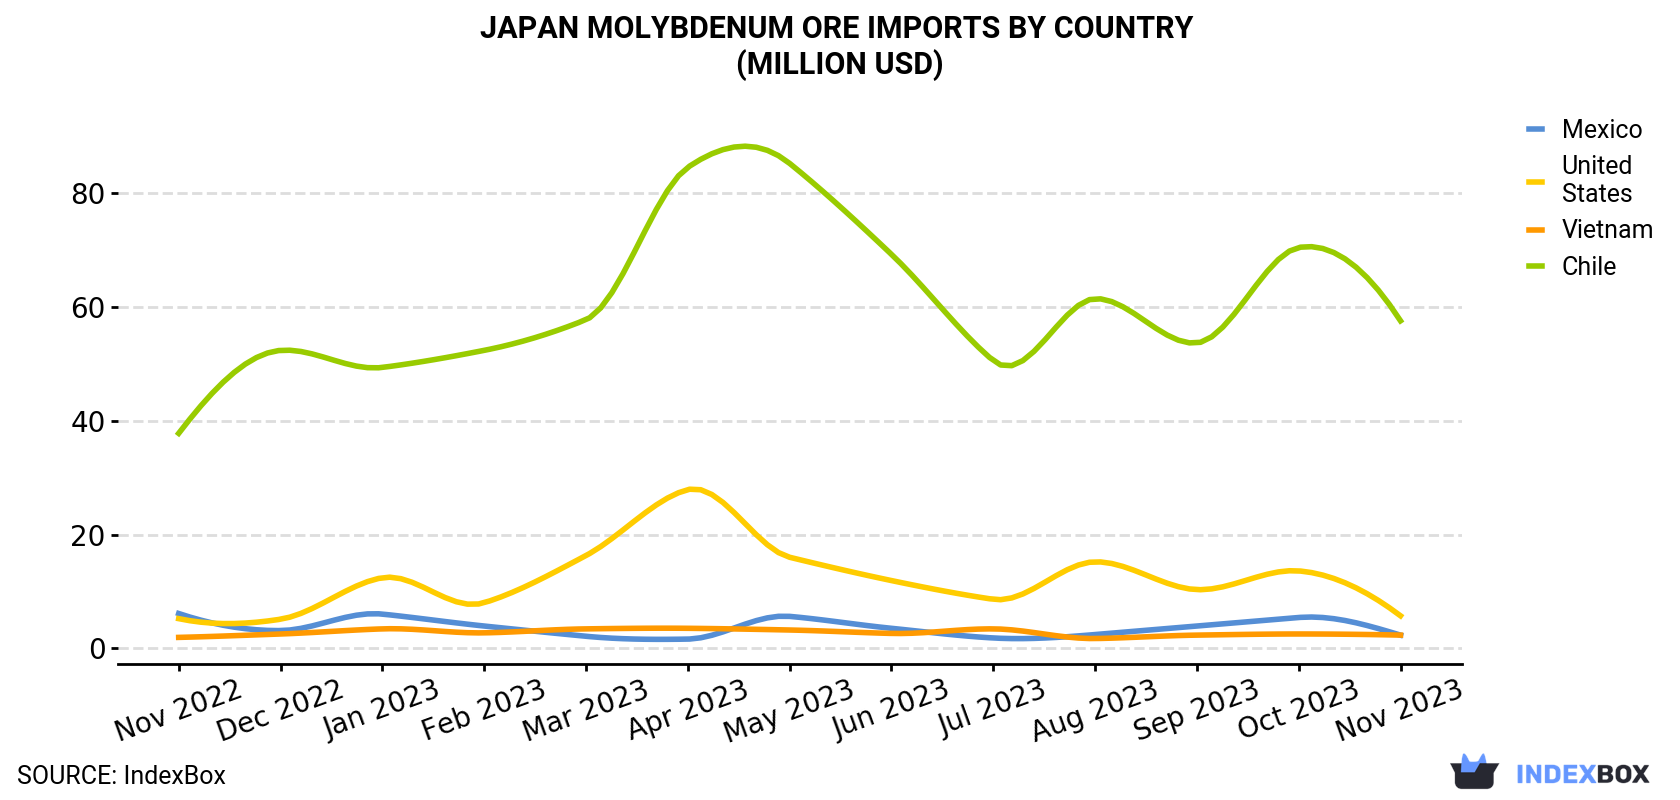 Japan Molybdenum Ore Imports By Country (Million USD)